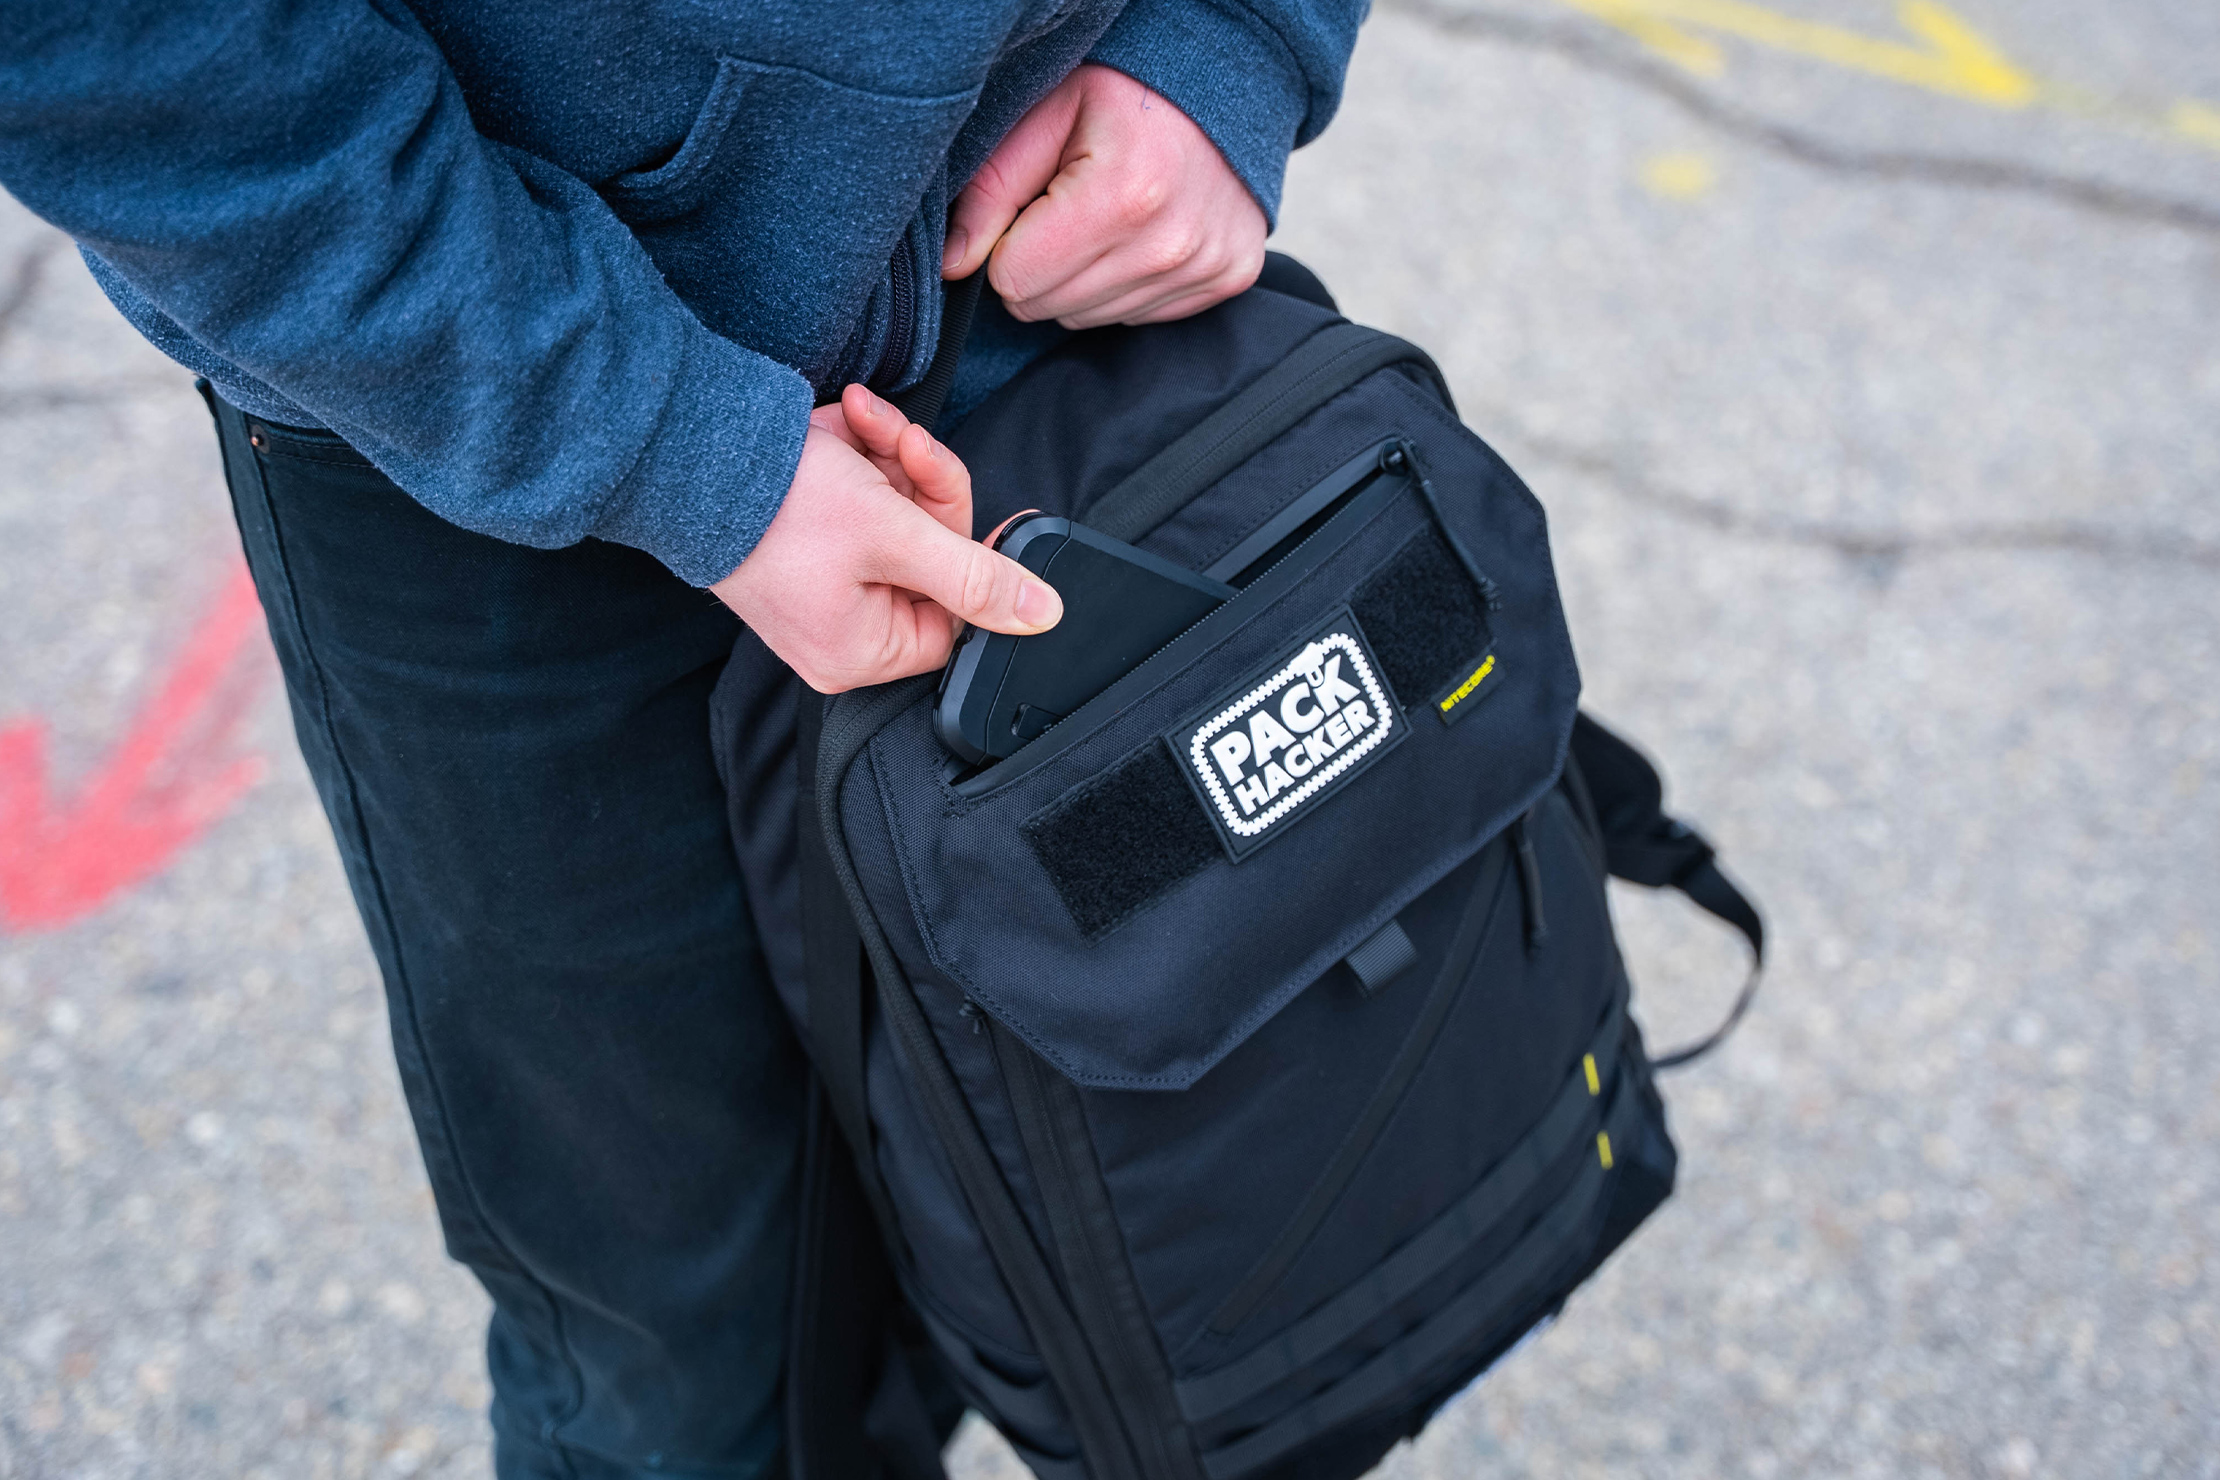 NITECORE BP23 Commuter Backpack In Use